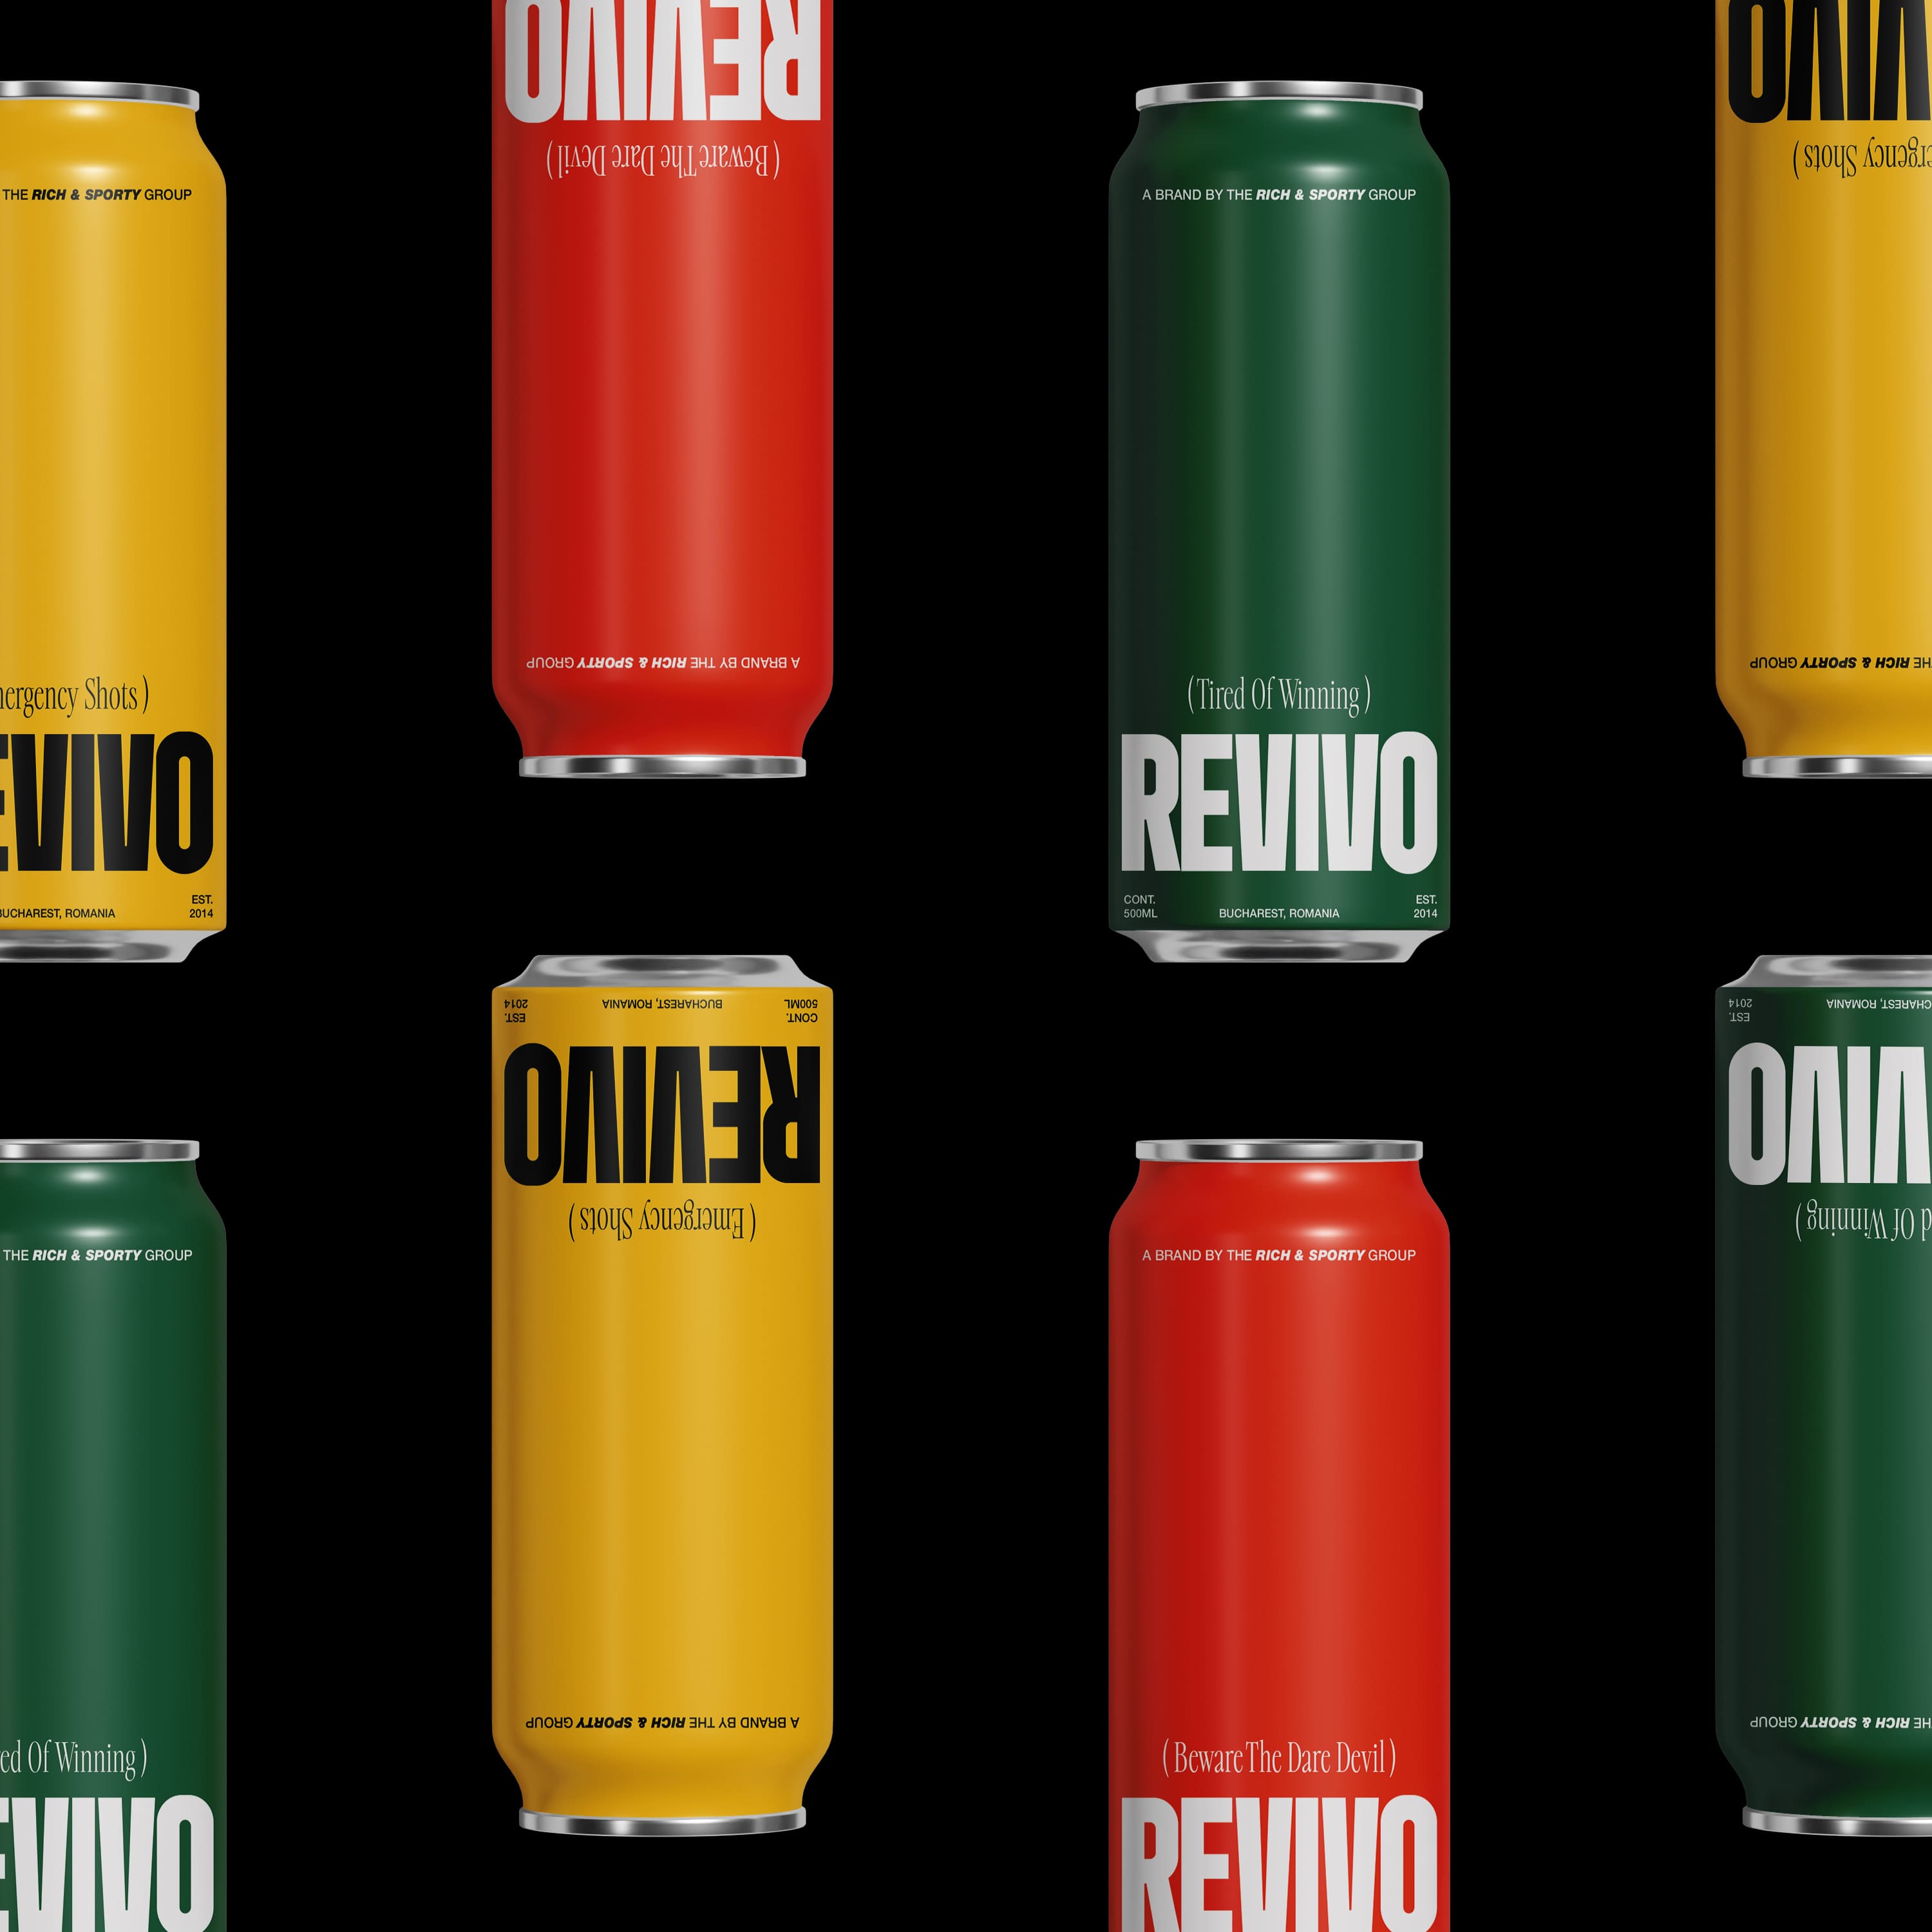 Revivo Brand Identity and Packaging Design Concept by Undoubt Studio